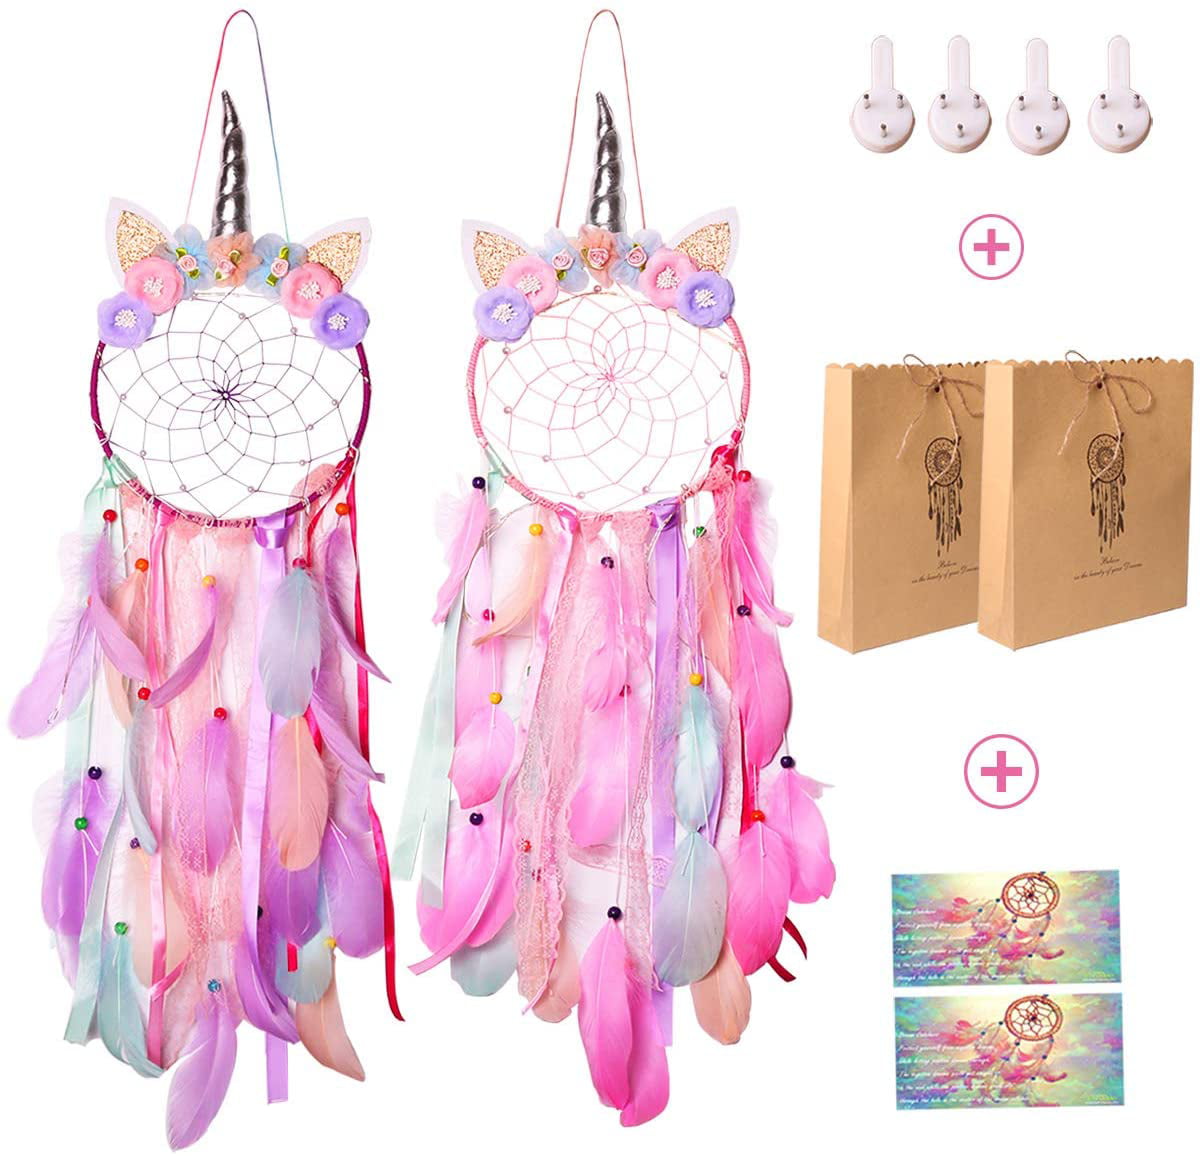 LED Unicorn Dream Catcher Dreamcatcher Feather Wall Baby Kids Room Decor Gifts 